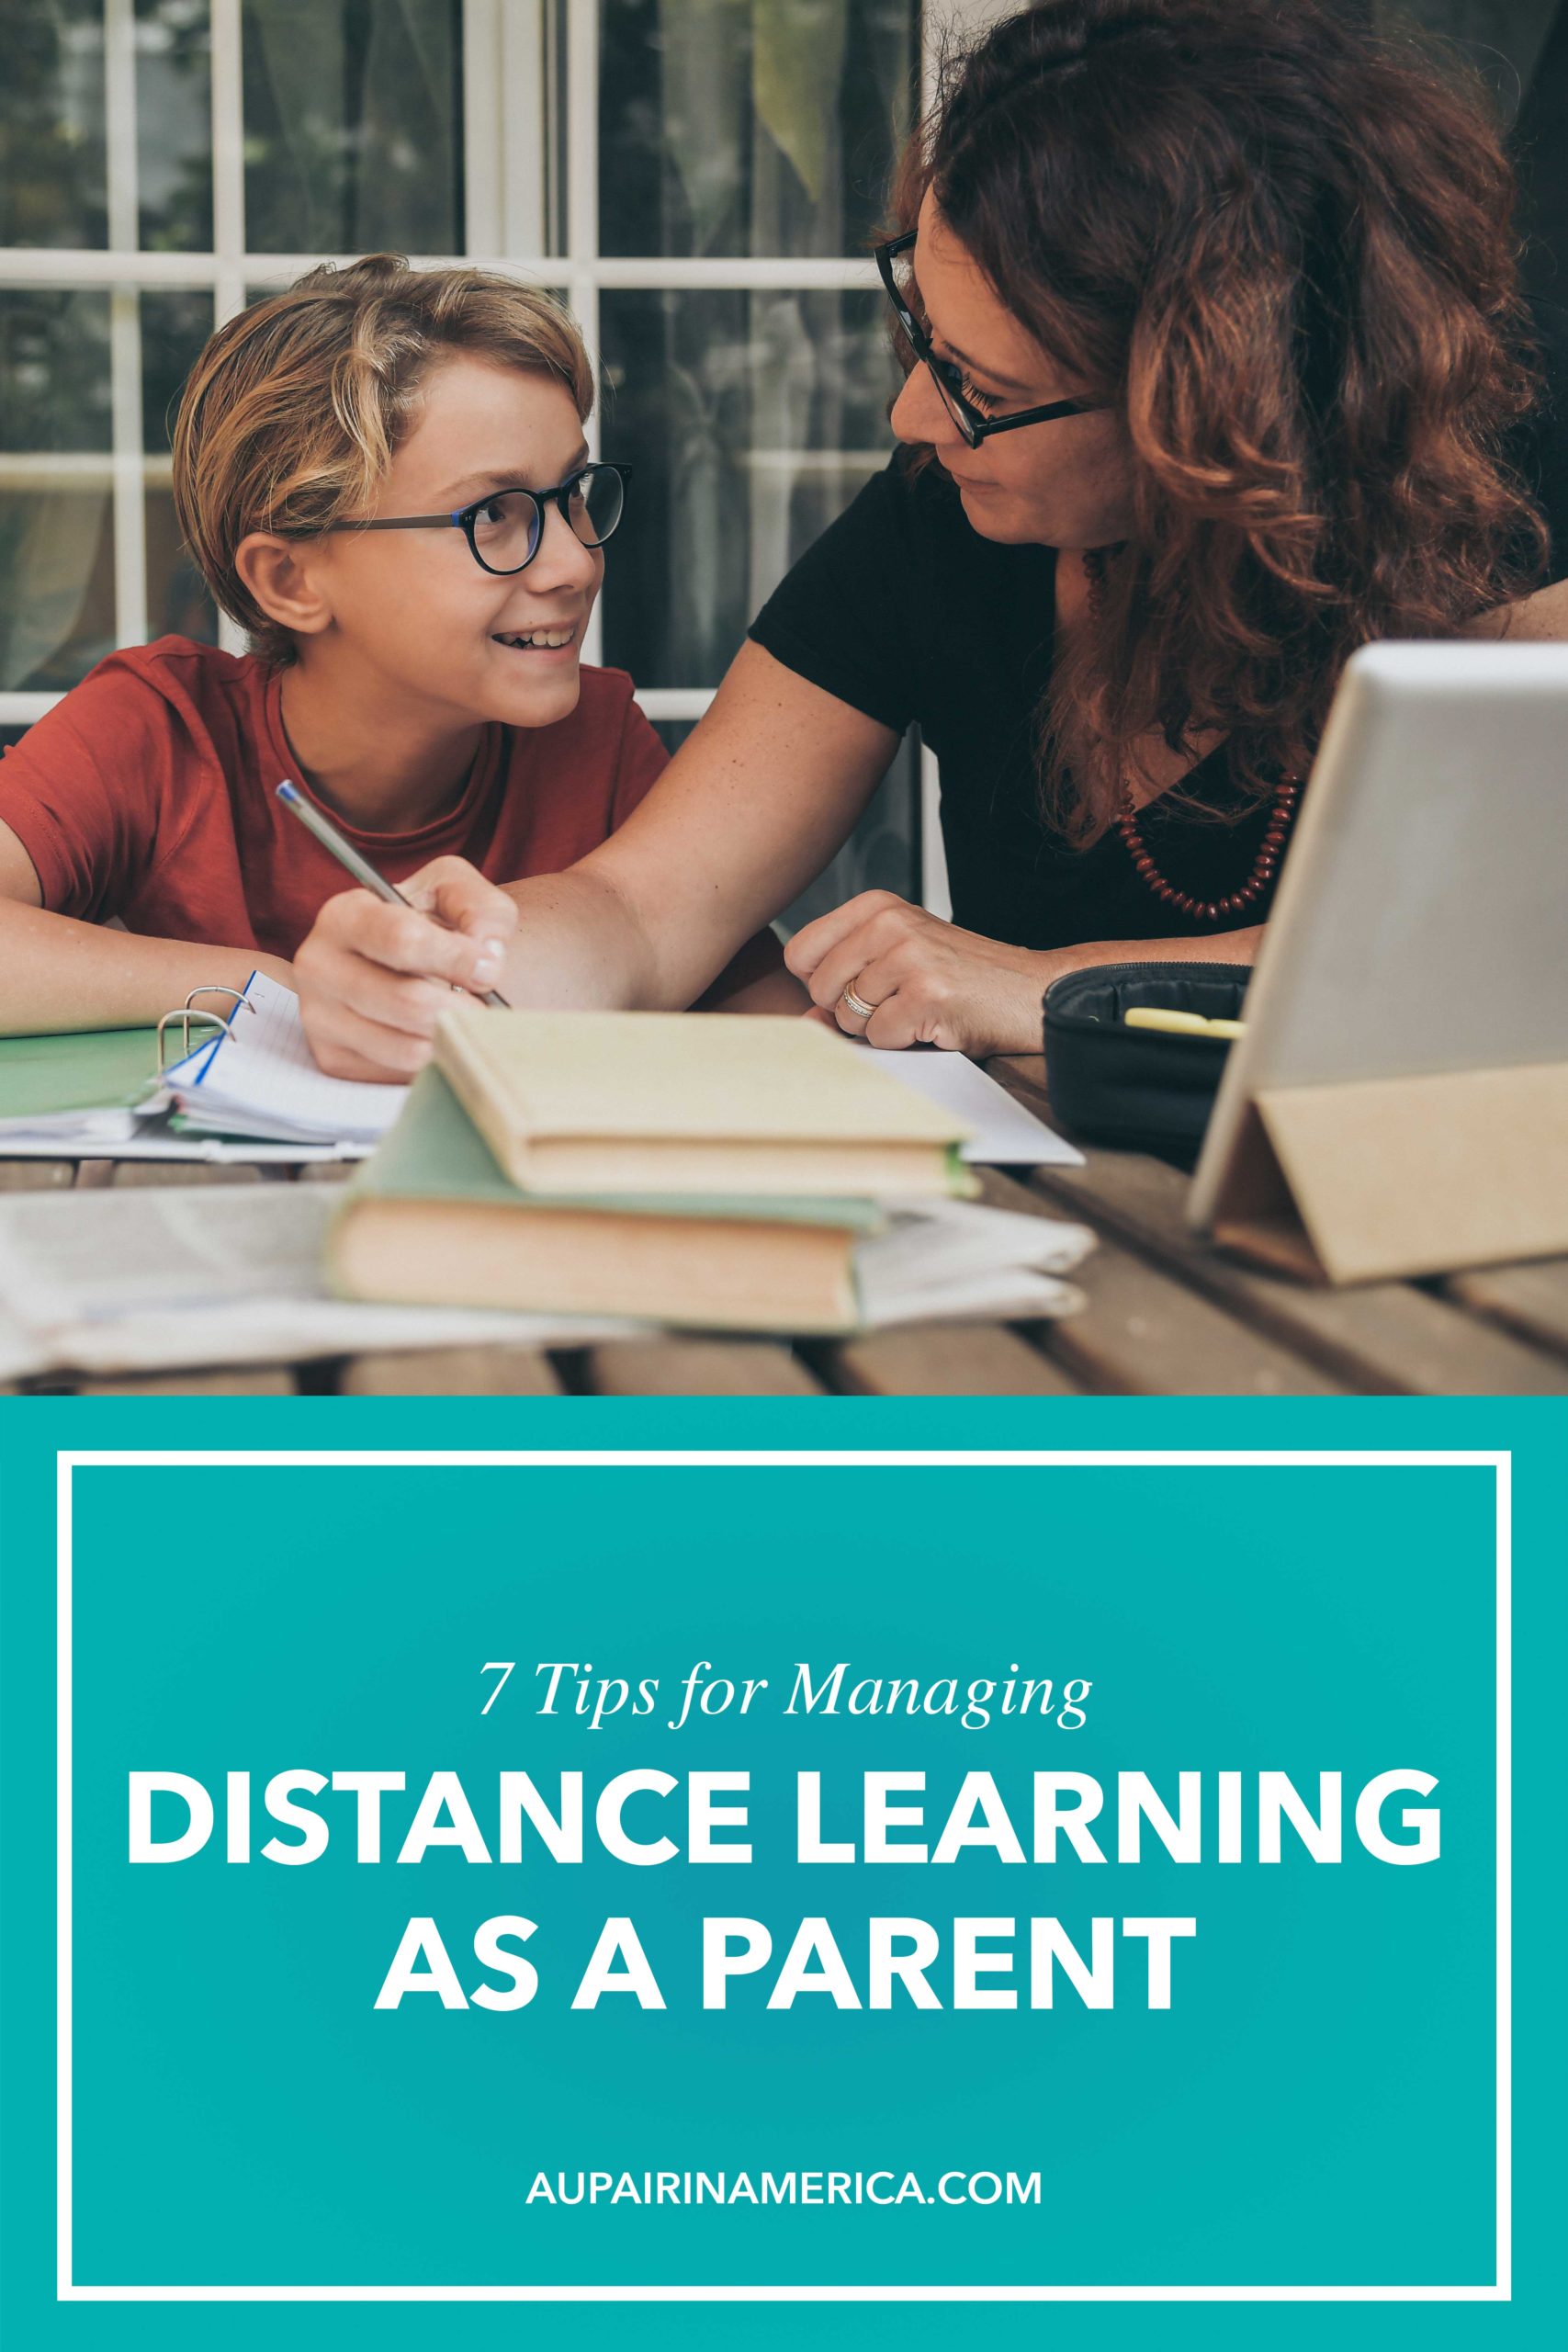 Discover 7 tips for managing distance learning as a parent and making homeschool stress-free!